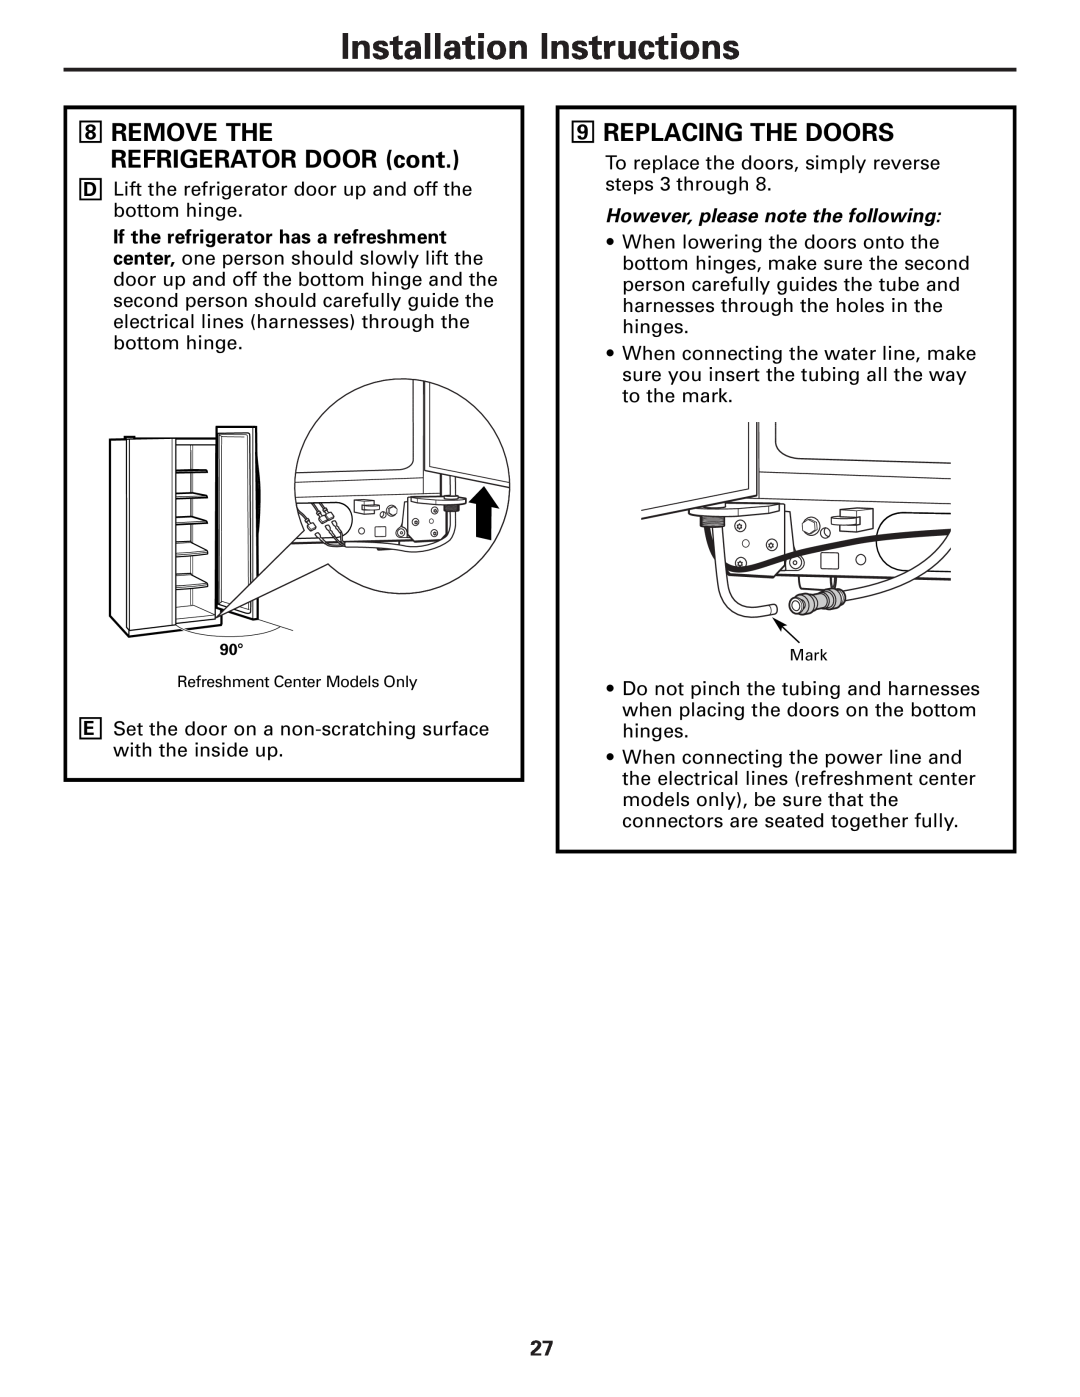 GE 200D8074P009, 49-60456 manual Replacing The Doors, However, please note the following, Installation Instructions 